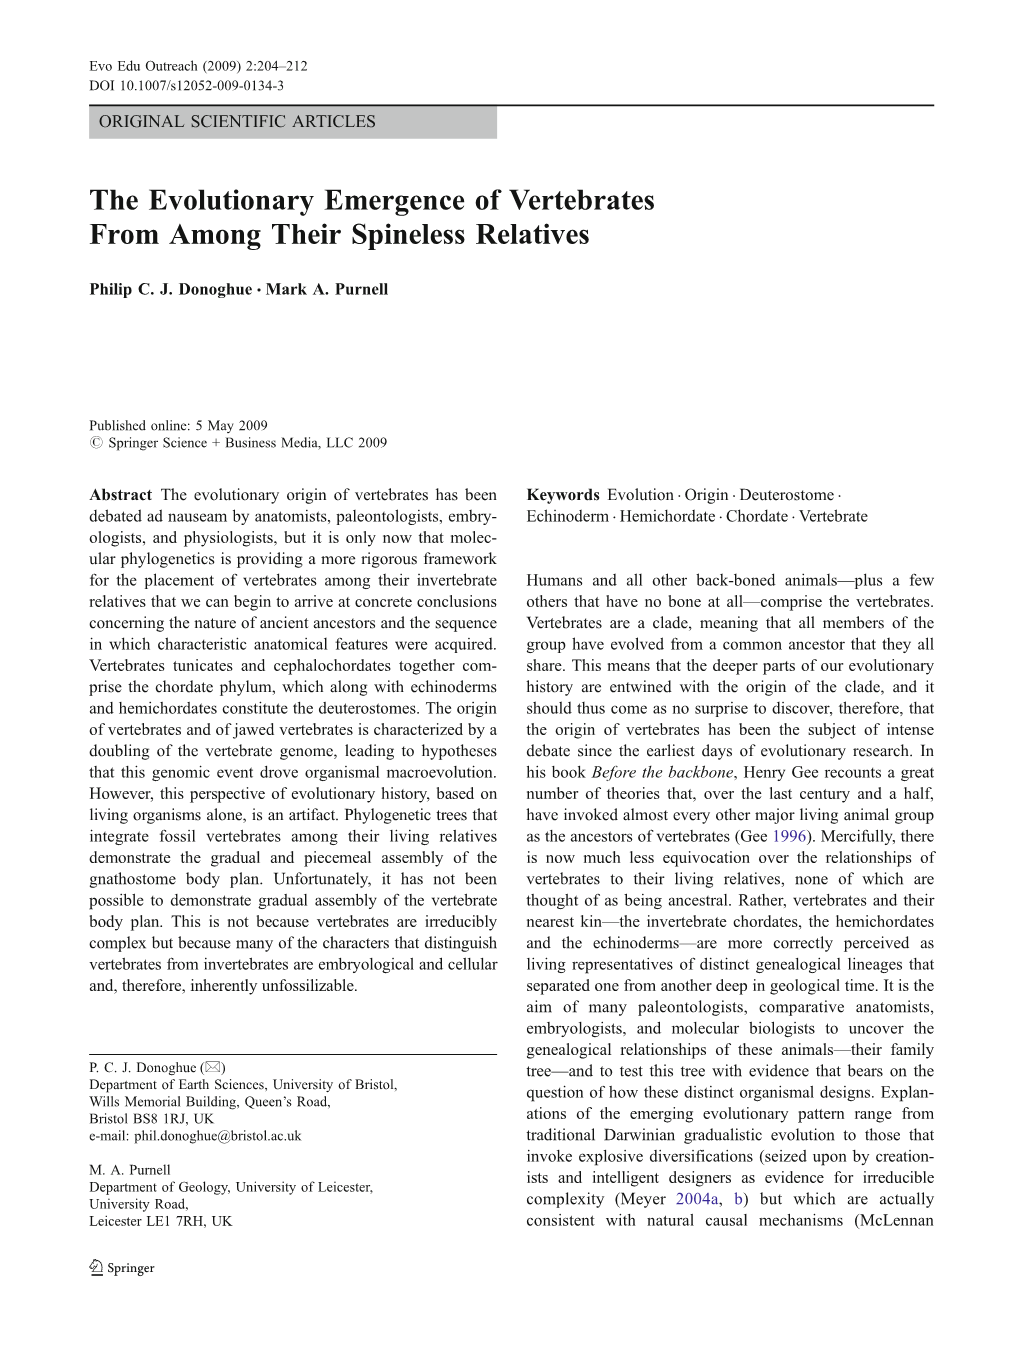 The Evolutionary Emergence of Vertebrates from Among Their Spineless Relatives